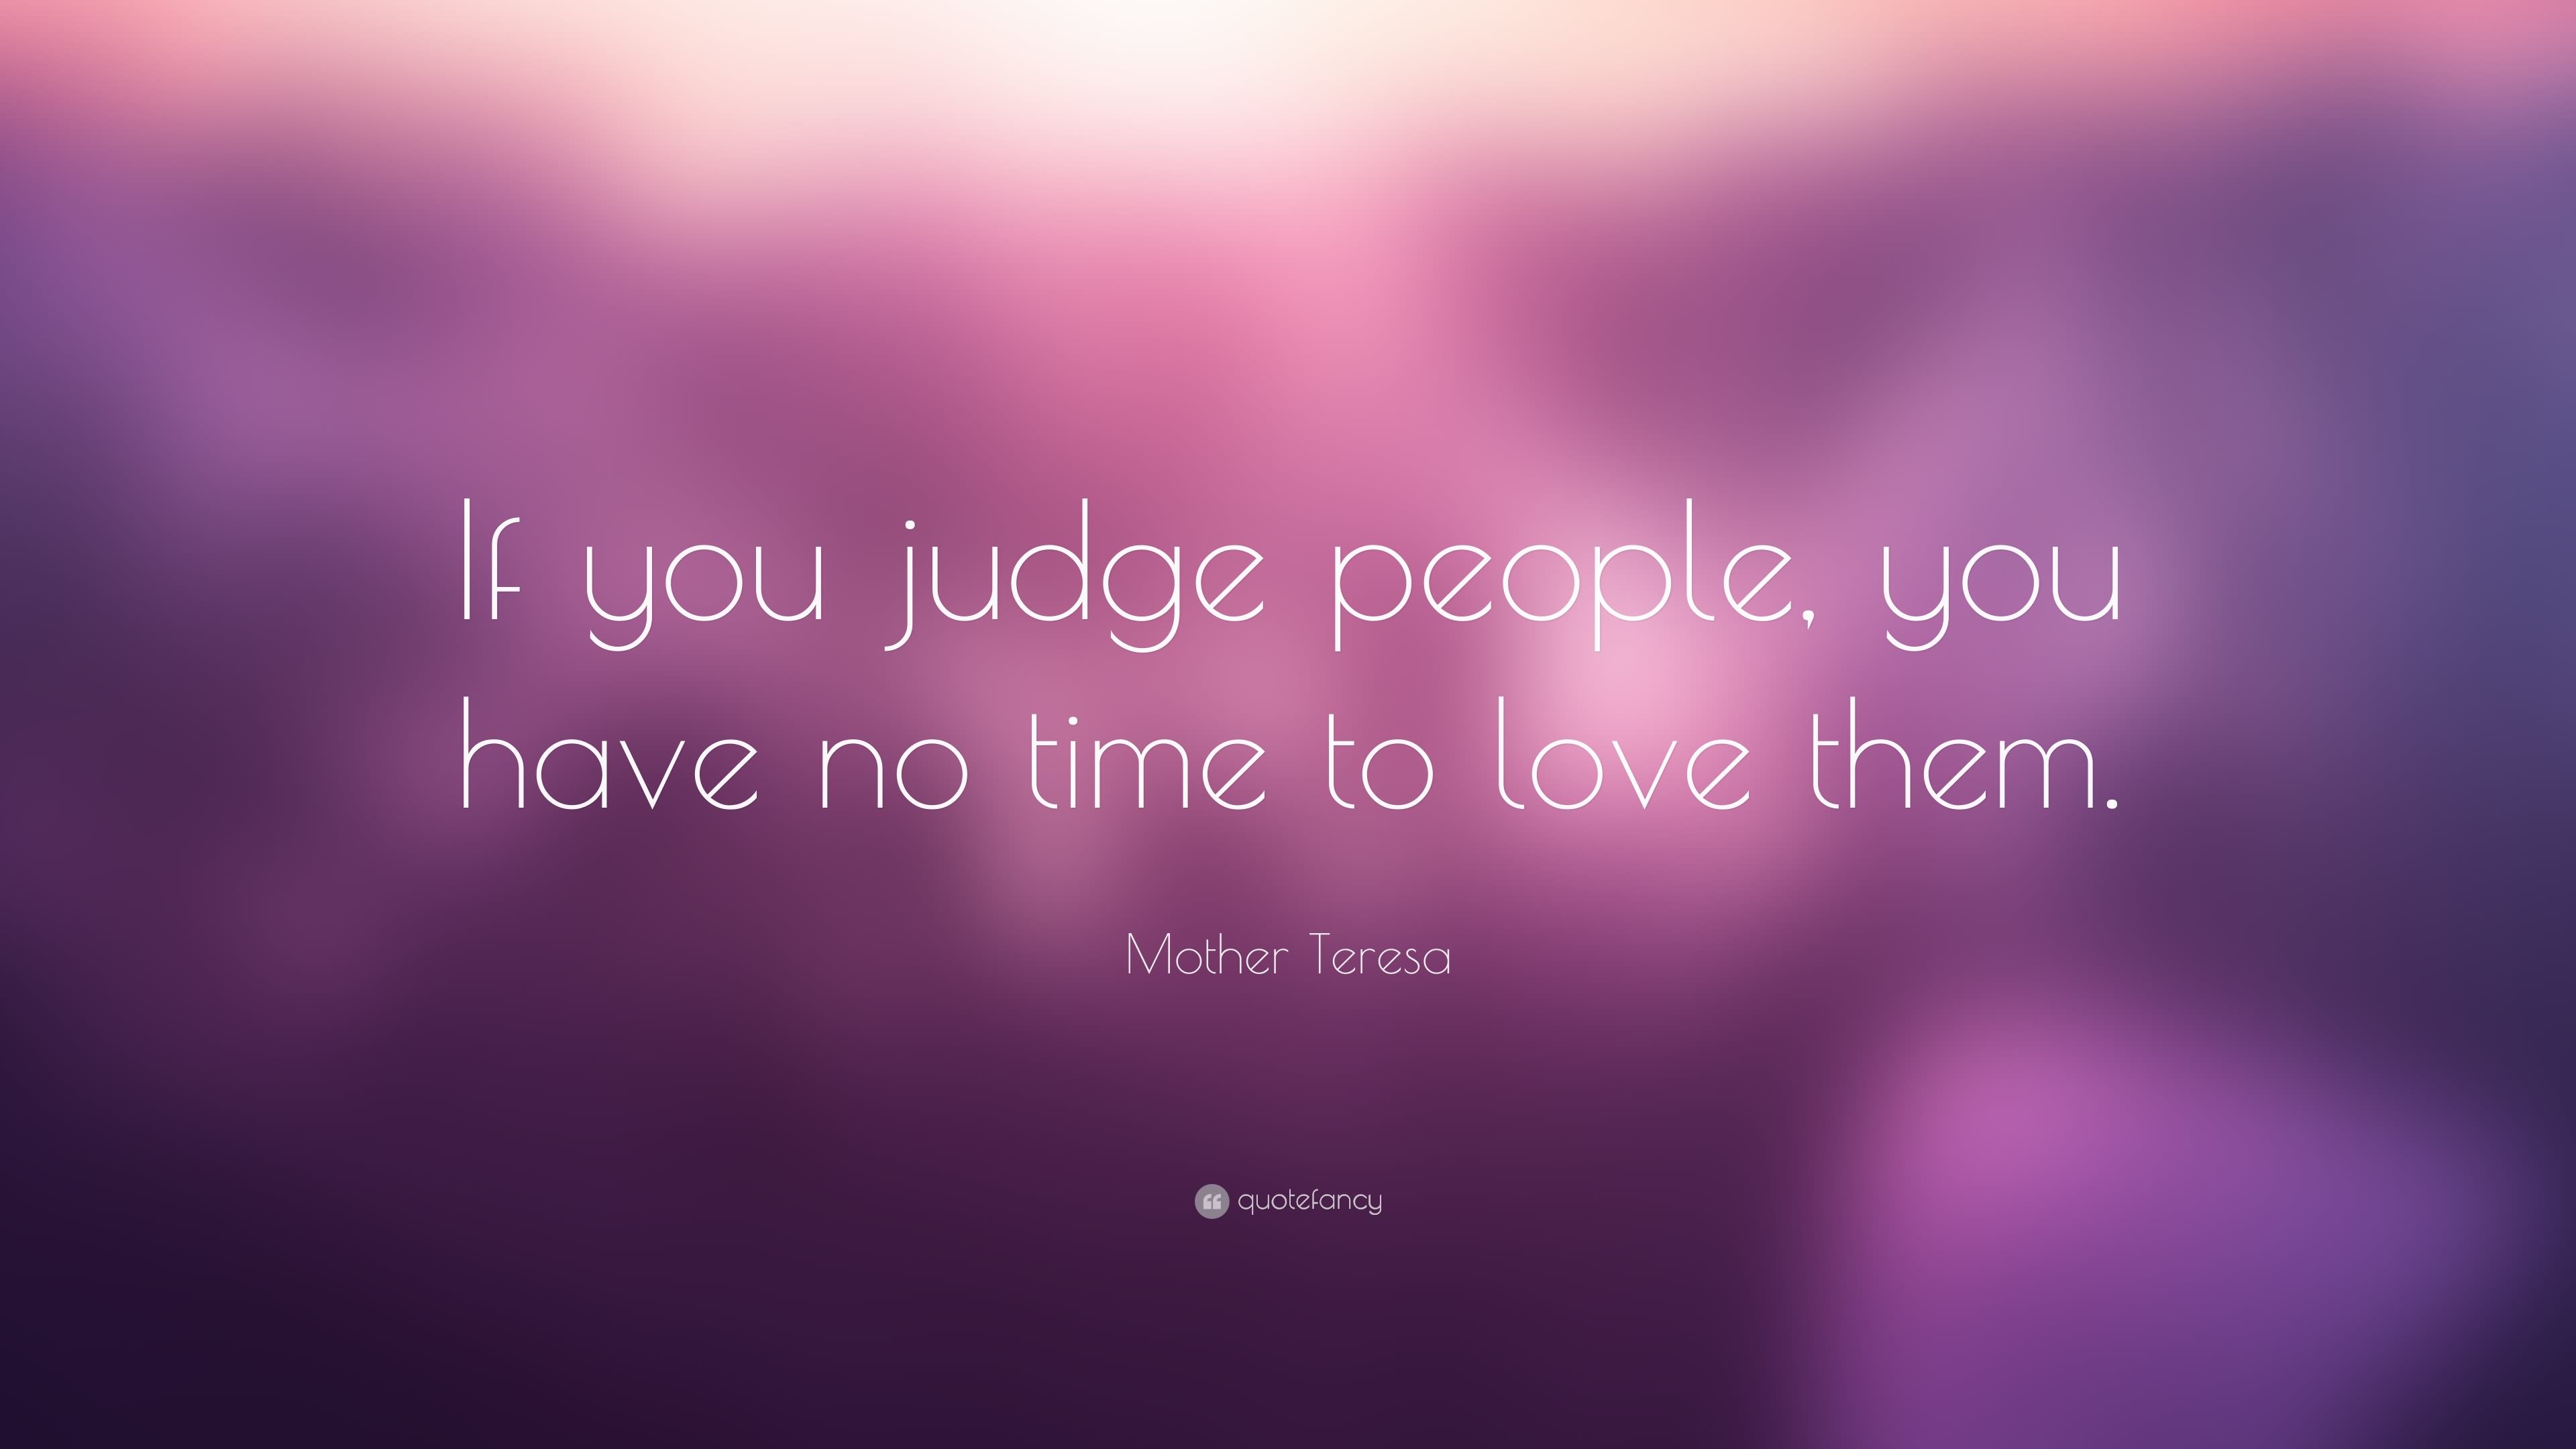 If you judge people, you have no time to love them. (7)